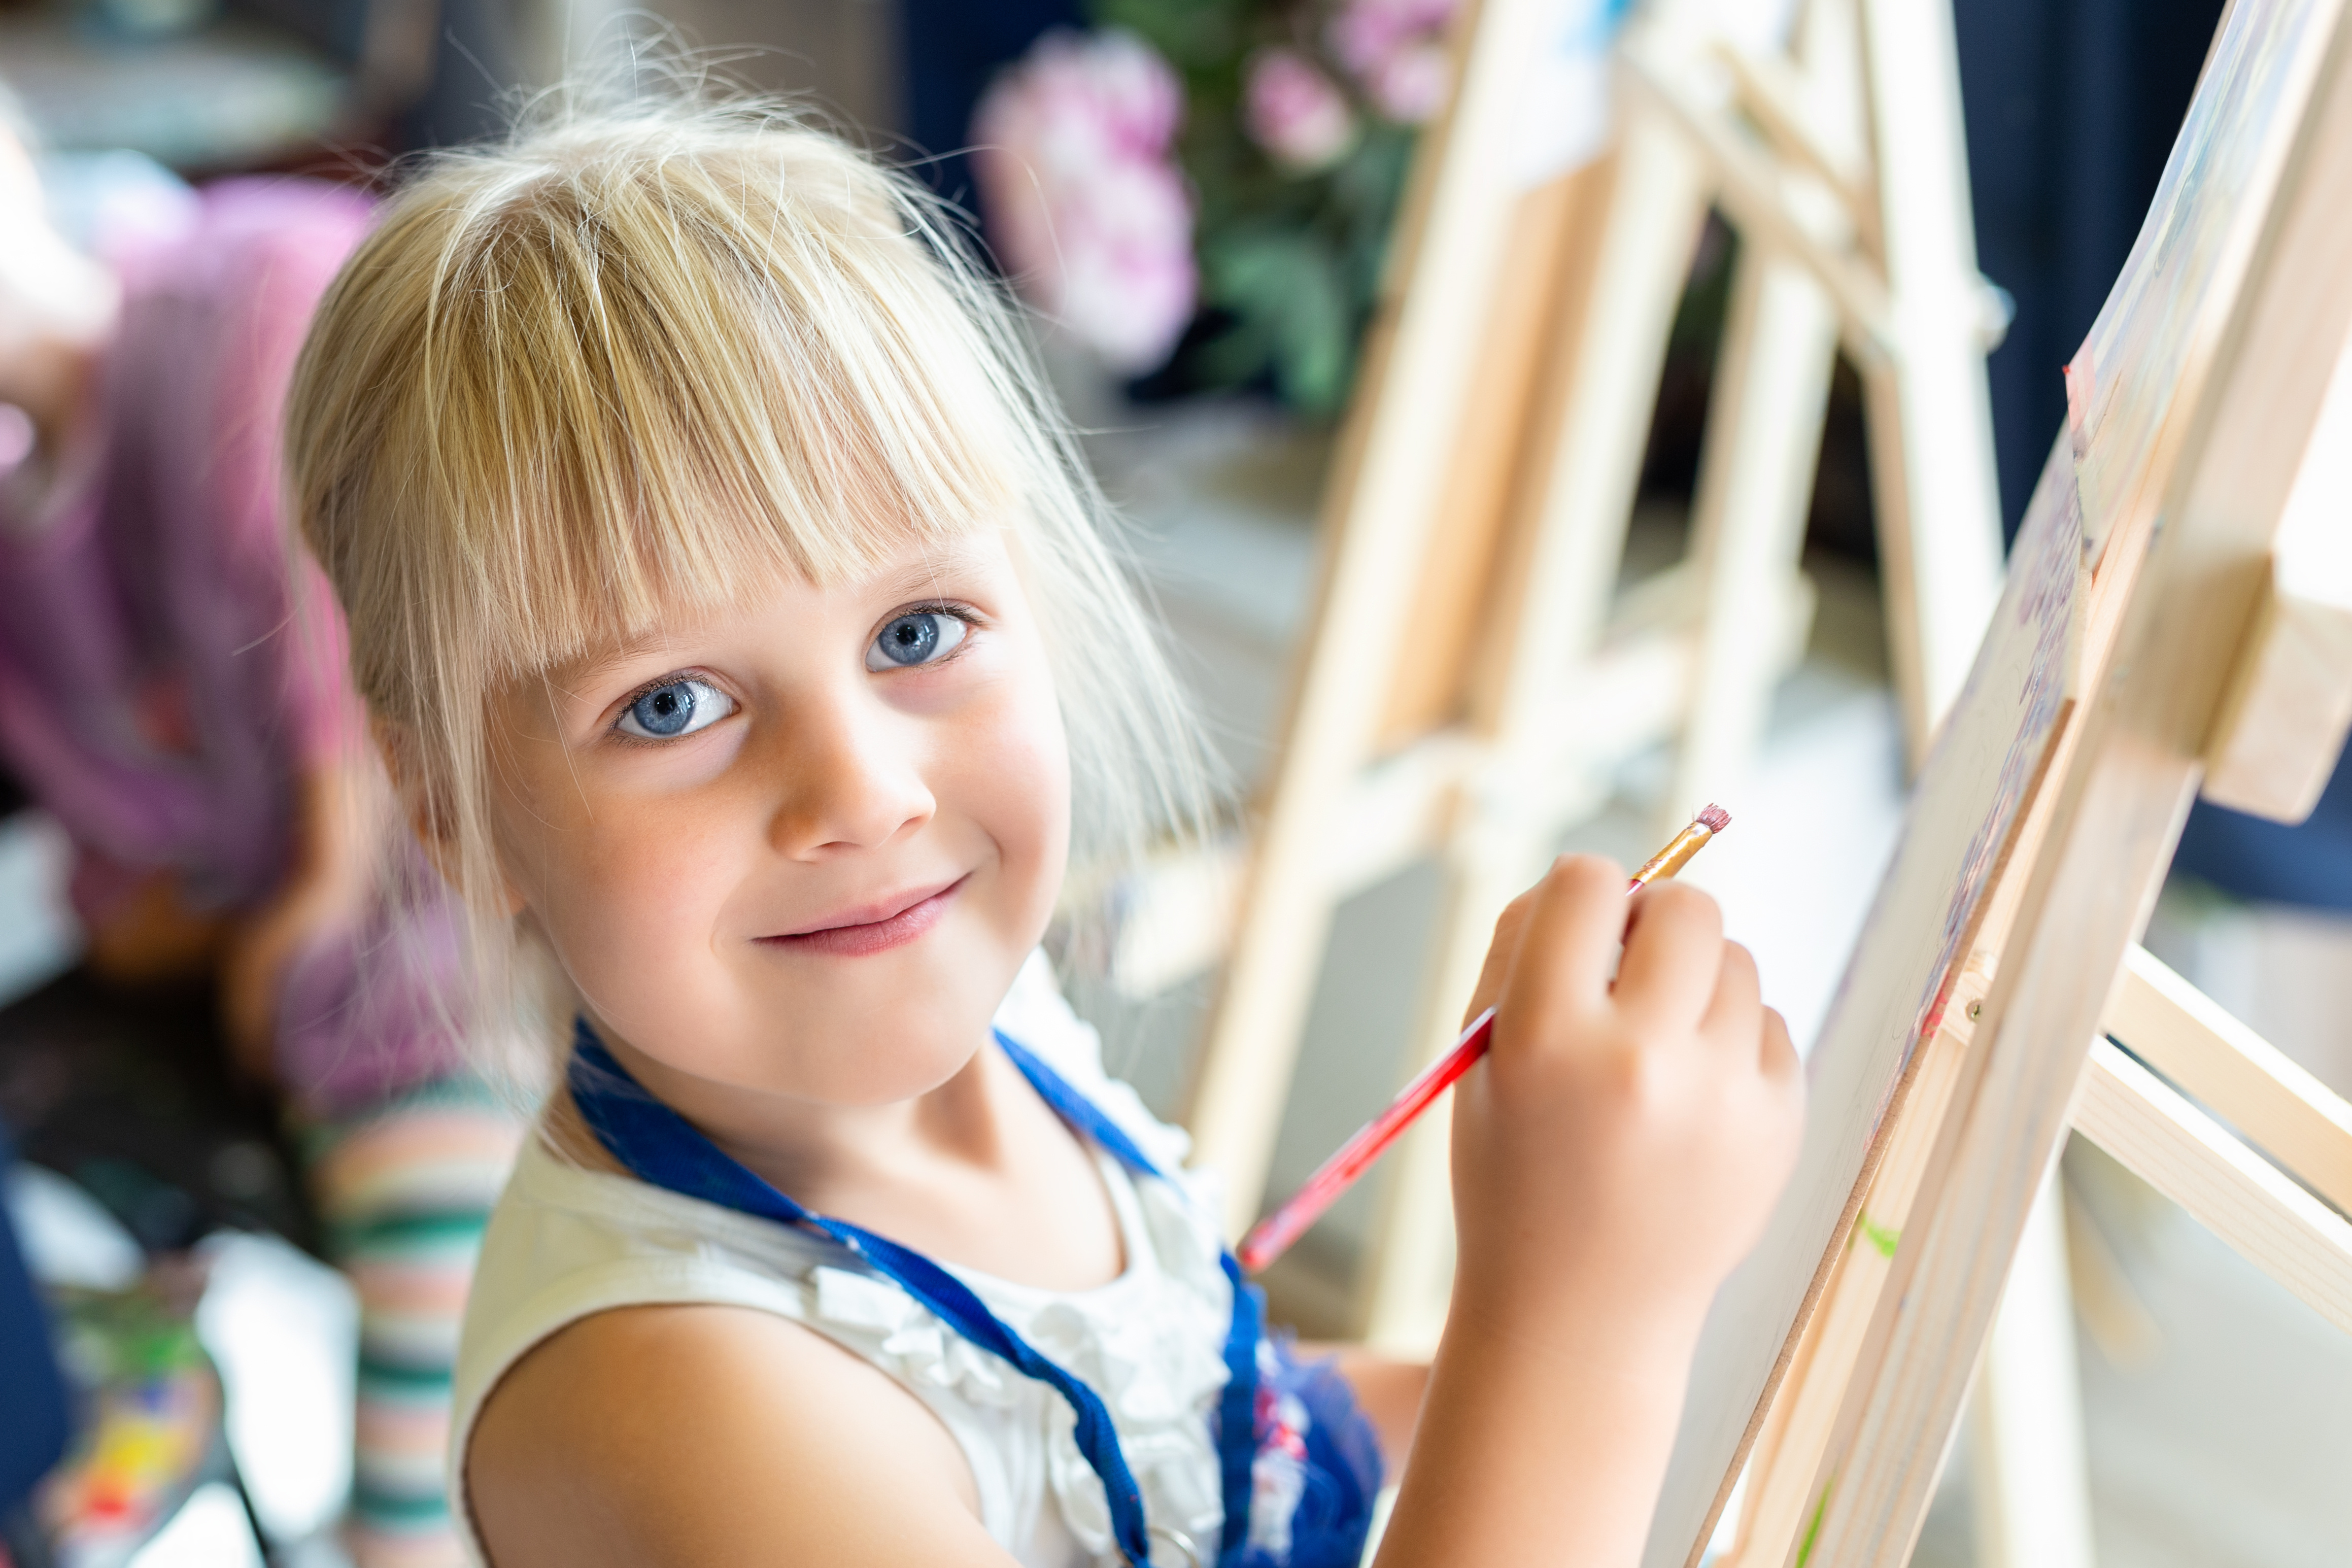 Blonde female child standing at painting easel smiling at camera.